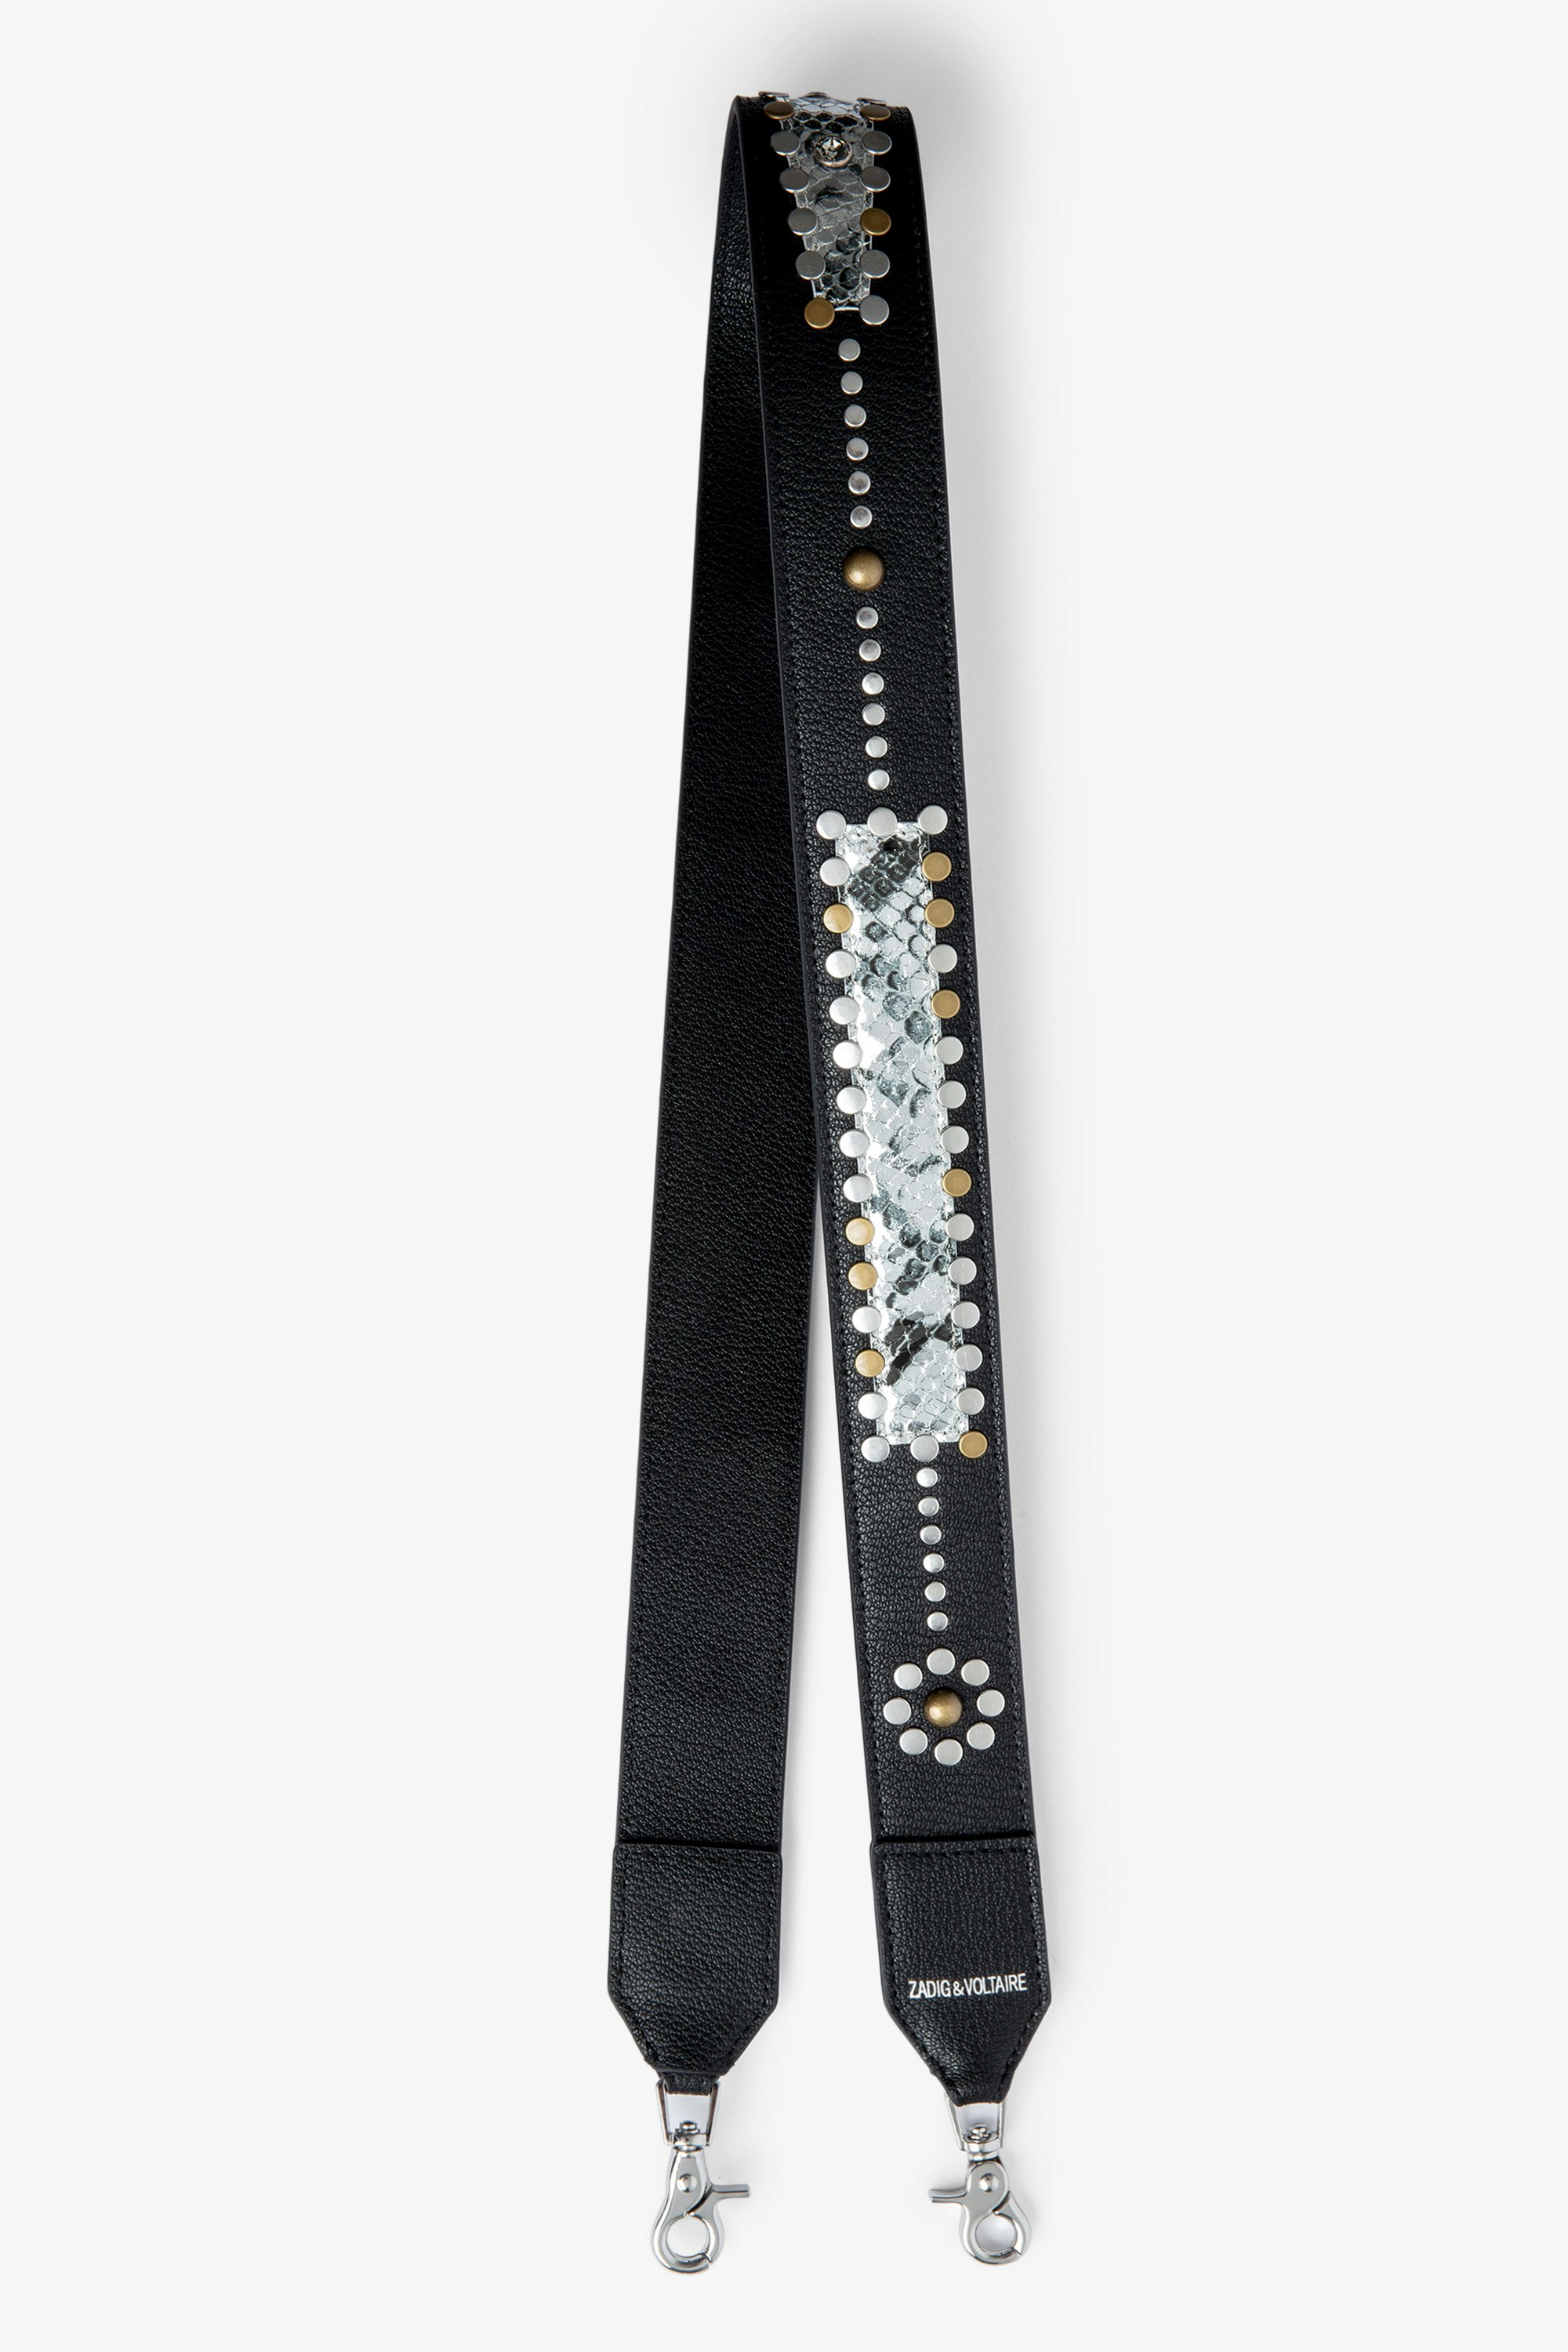 Wild ストラップ Women’s black grained leather shoulder strap with rivets and python-embossed panels